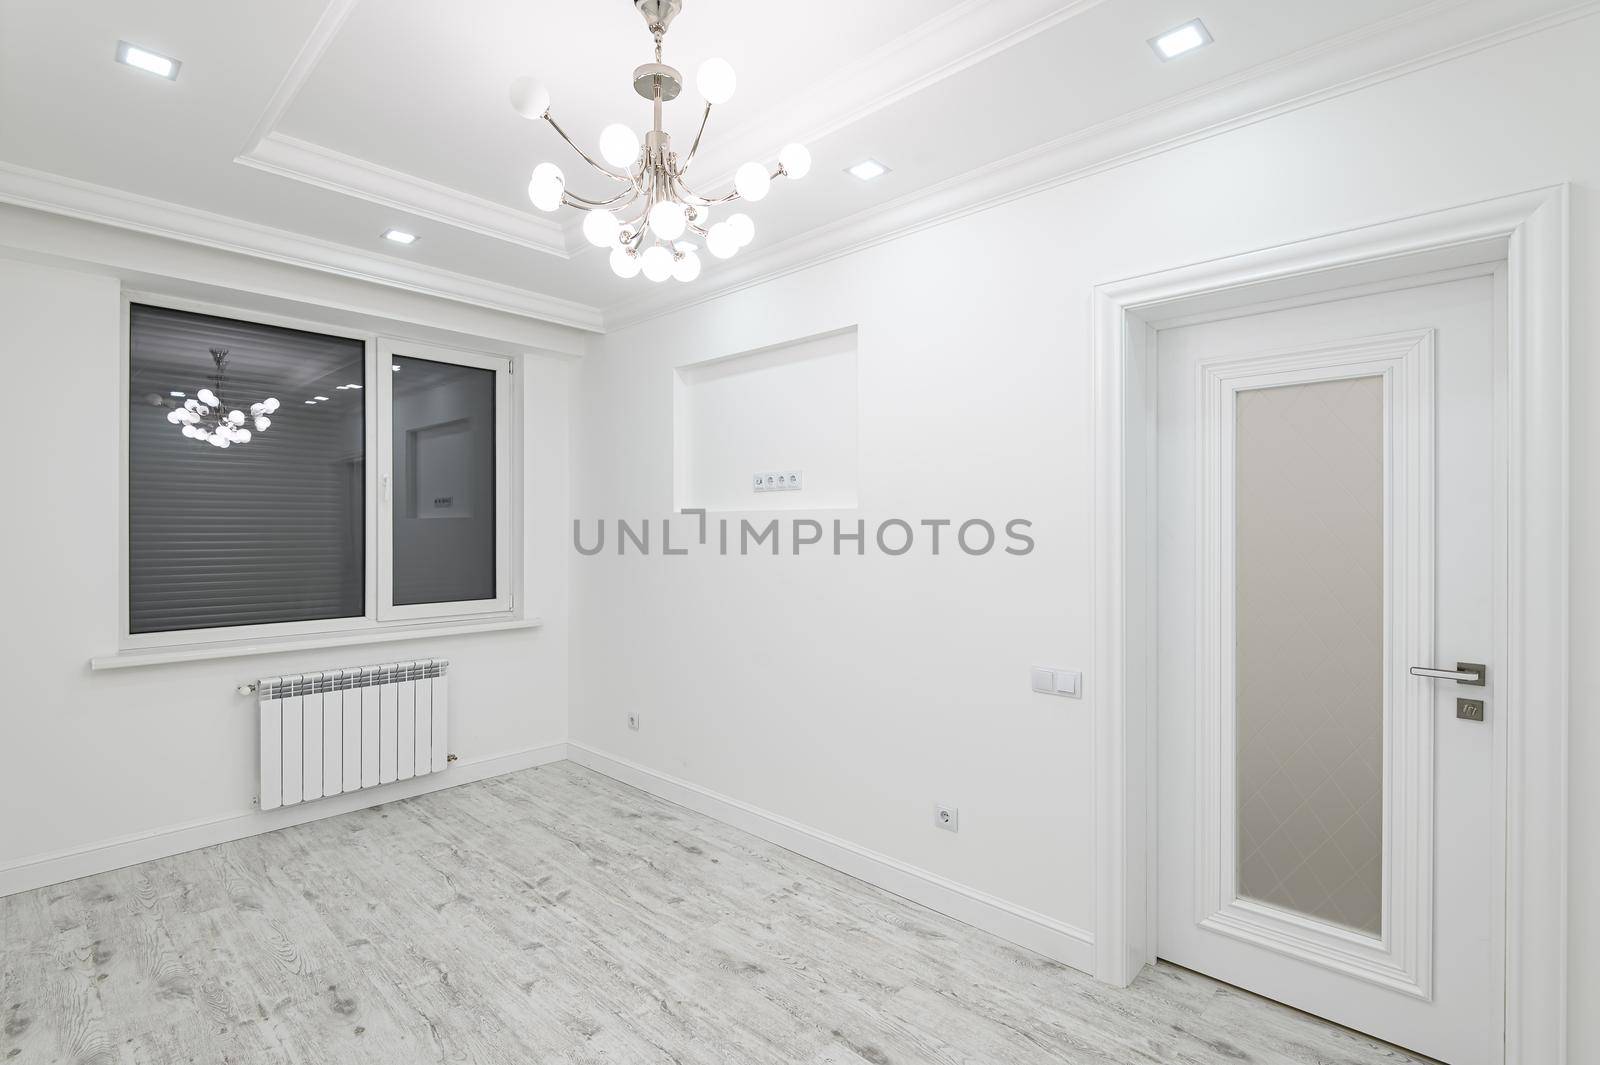 modern white empty room mockup or template with window and entry door